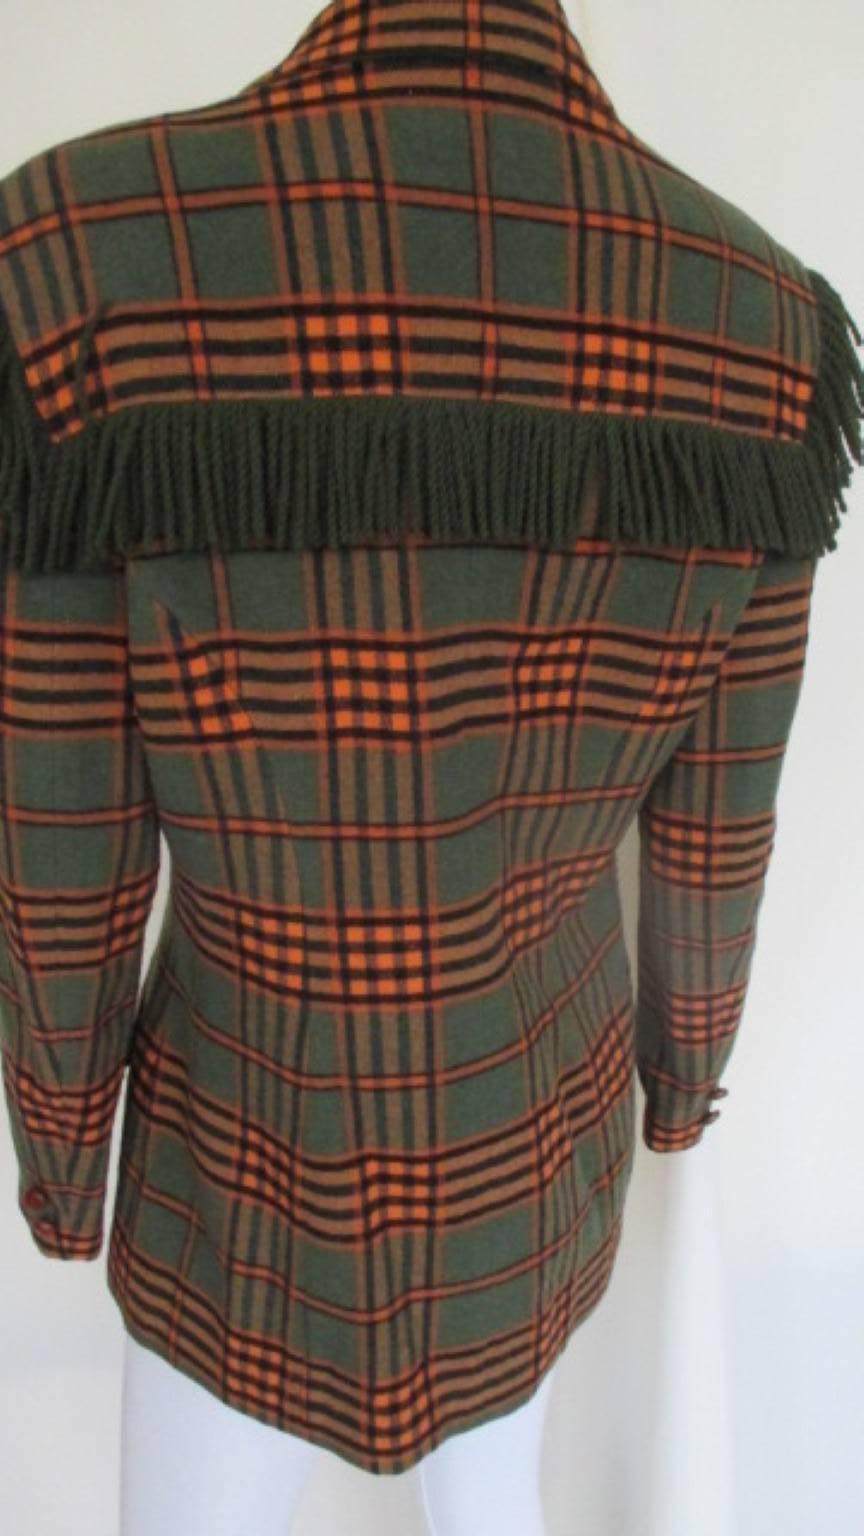 Roccobarocco Wool Checked Fringed Jacket In Good Condition For Sale In Amsterdam, NL